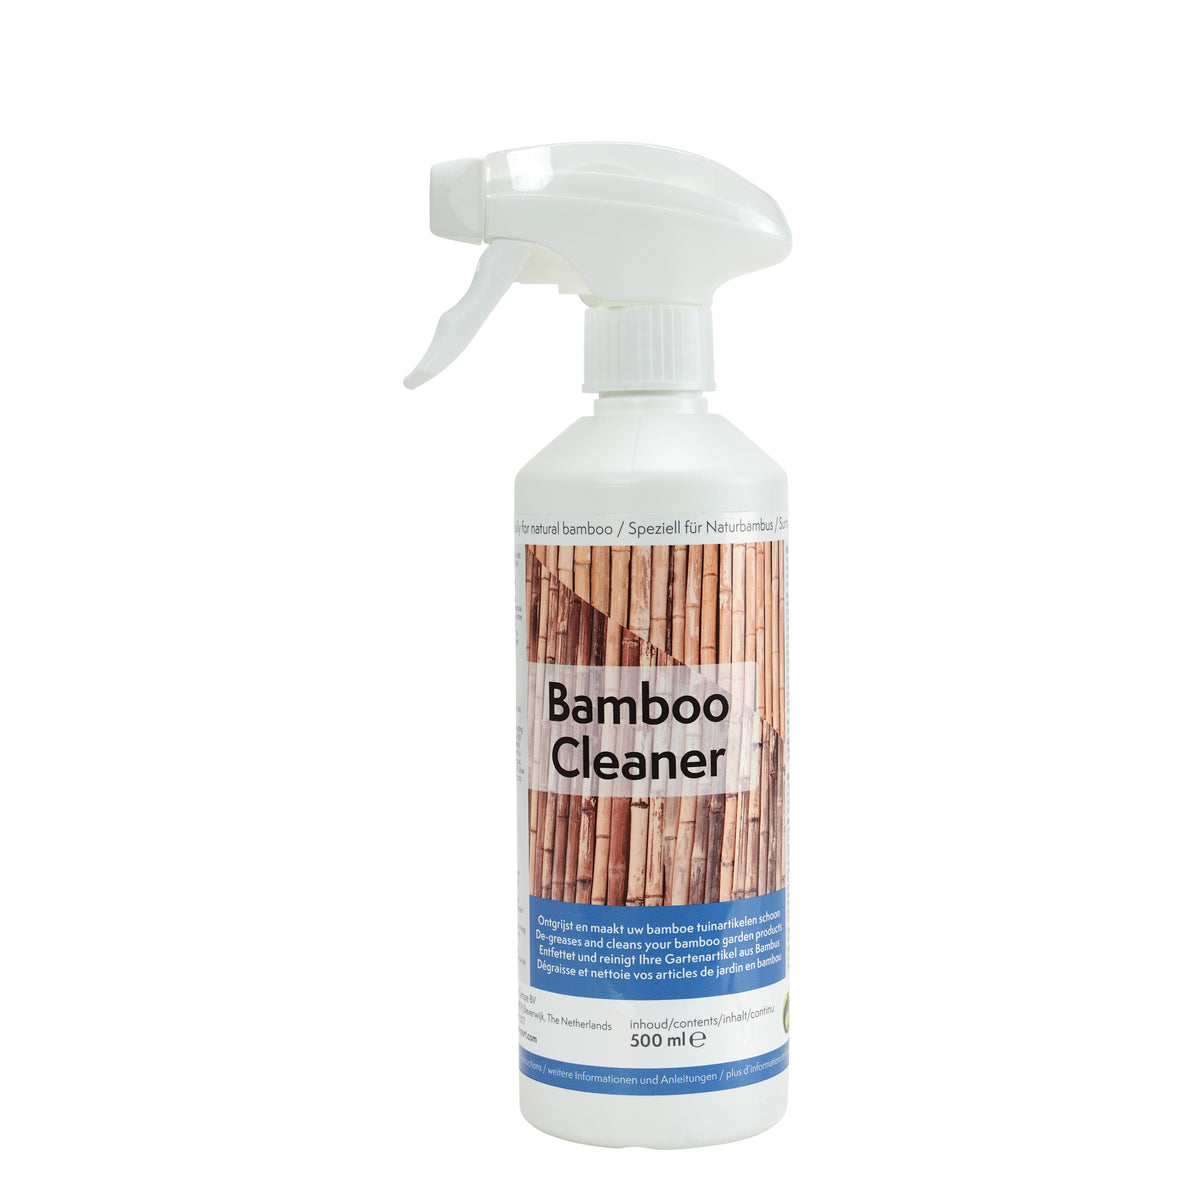 Bamboo Cleaner